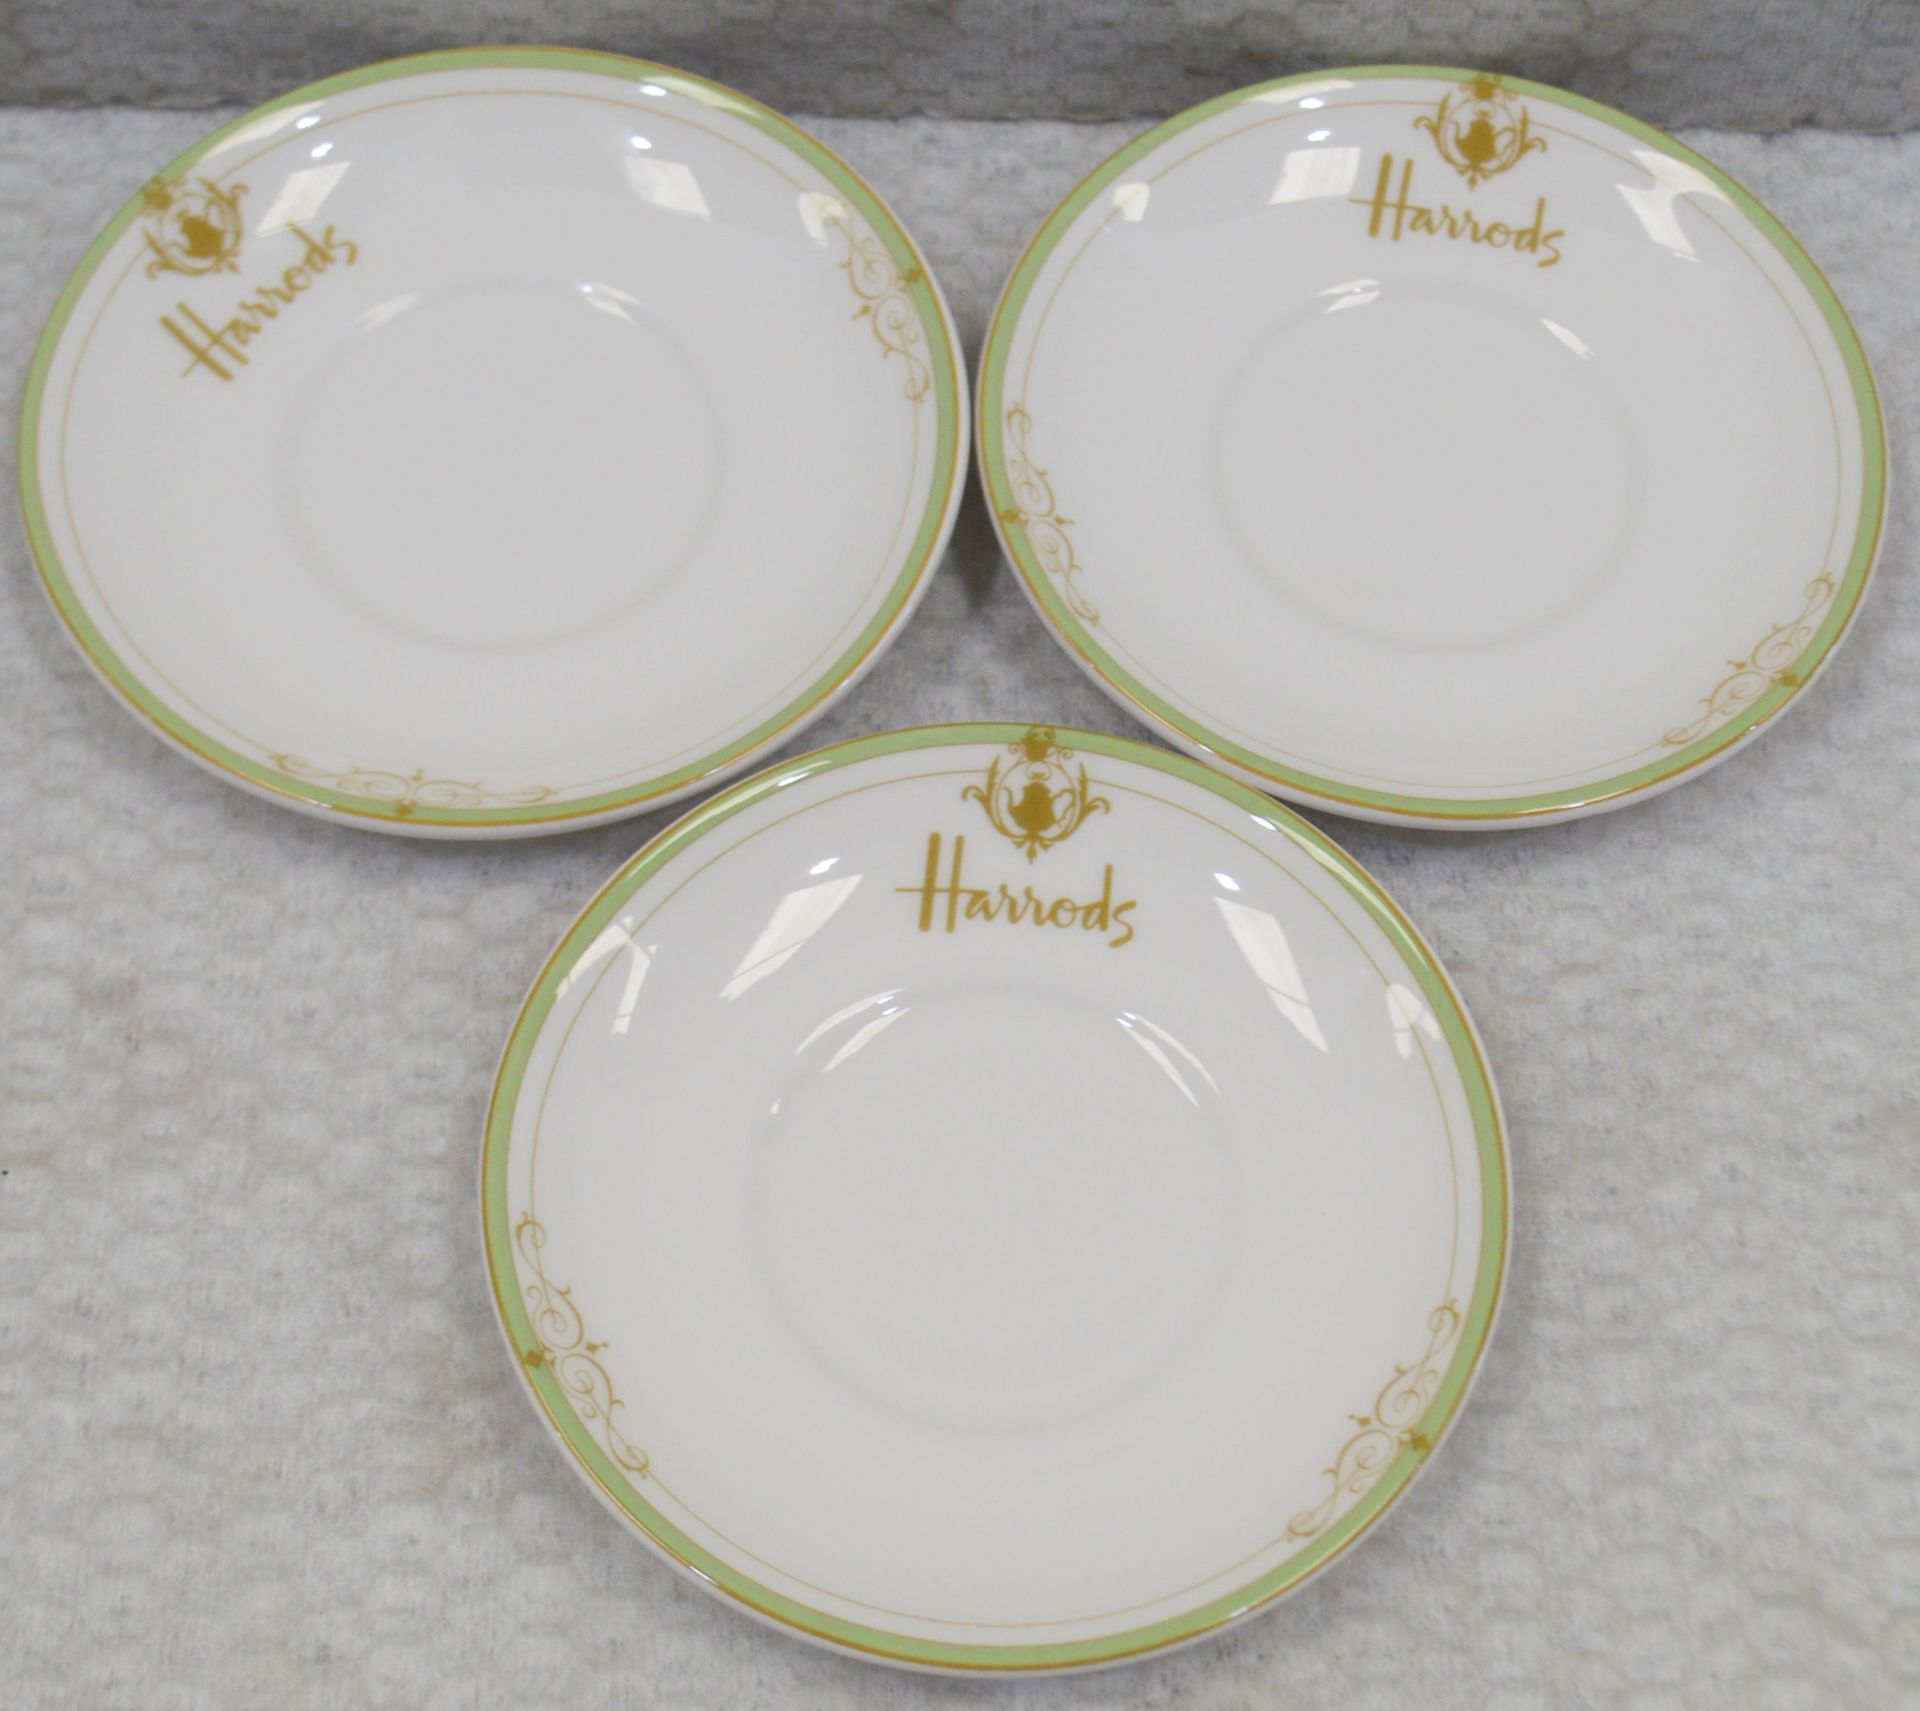 36 x Harrods Two Colour Litho Can Stands Plates - Dimensions: 6.5 inch slim - Recently Removed - Image 2 of 2